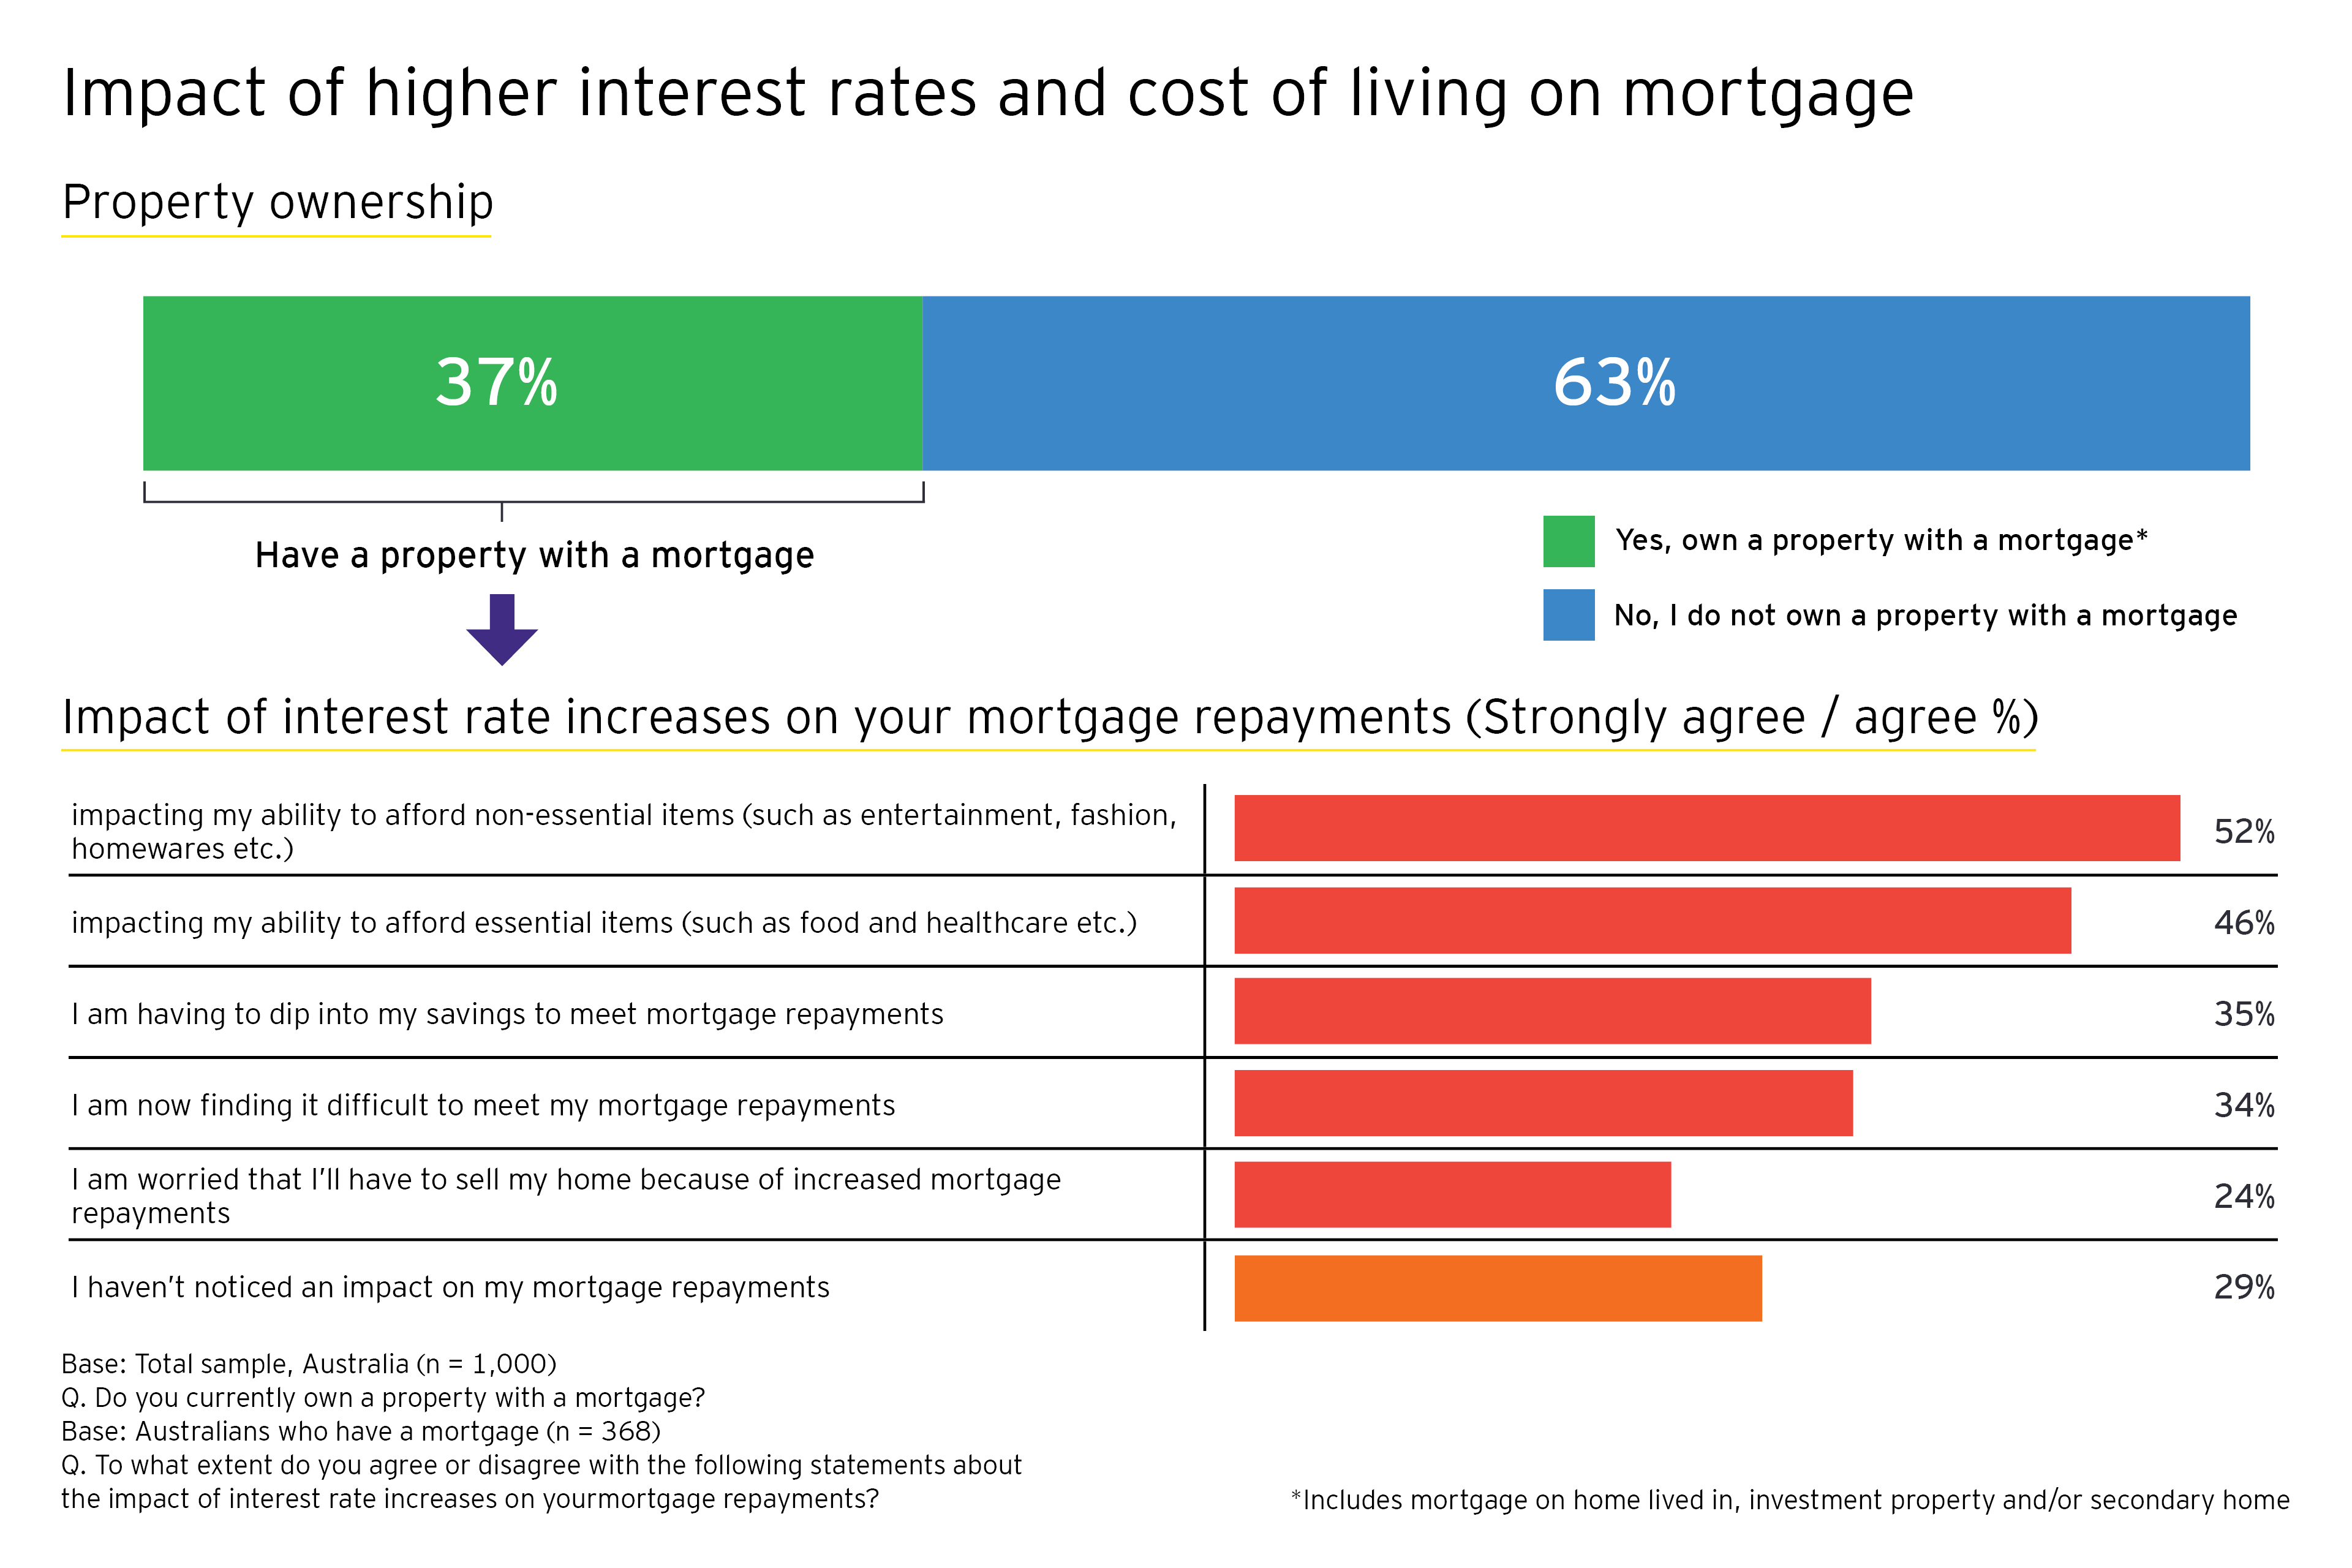 Impact of interest rates and inflation on mortgage repayments